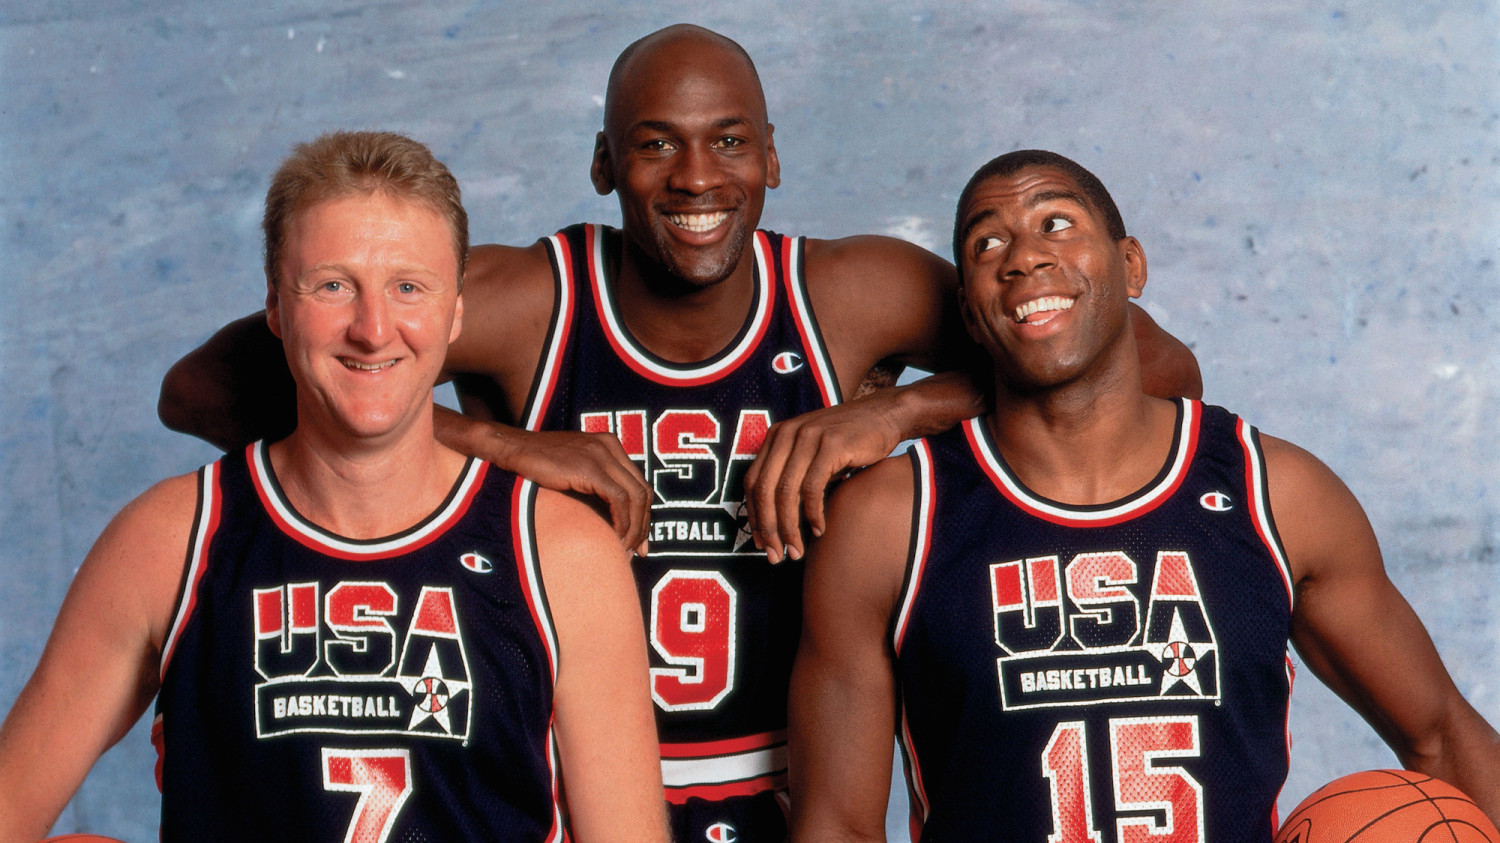 Sorry, But If You Were Born After 1990, There’s No Way You’ll Pass This Quiz Larry Bird, Michael Jordan, and Magic Johnson